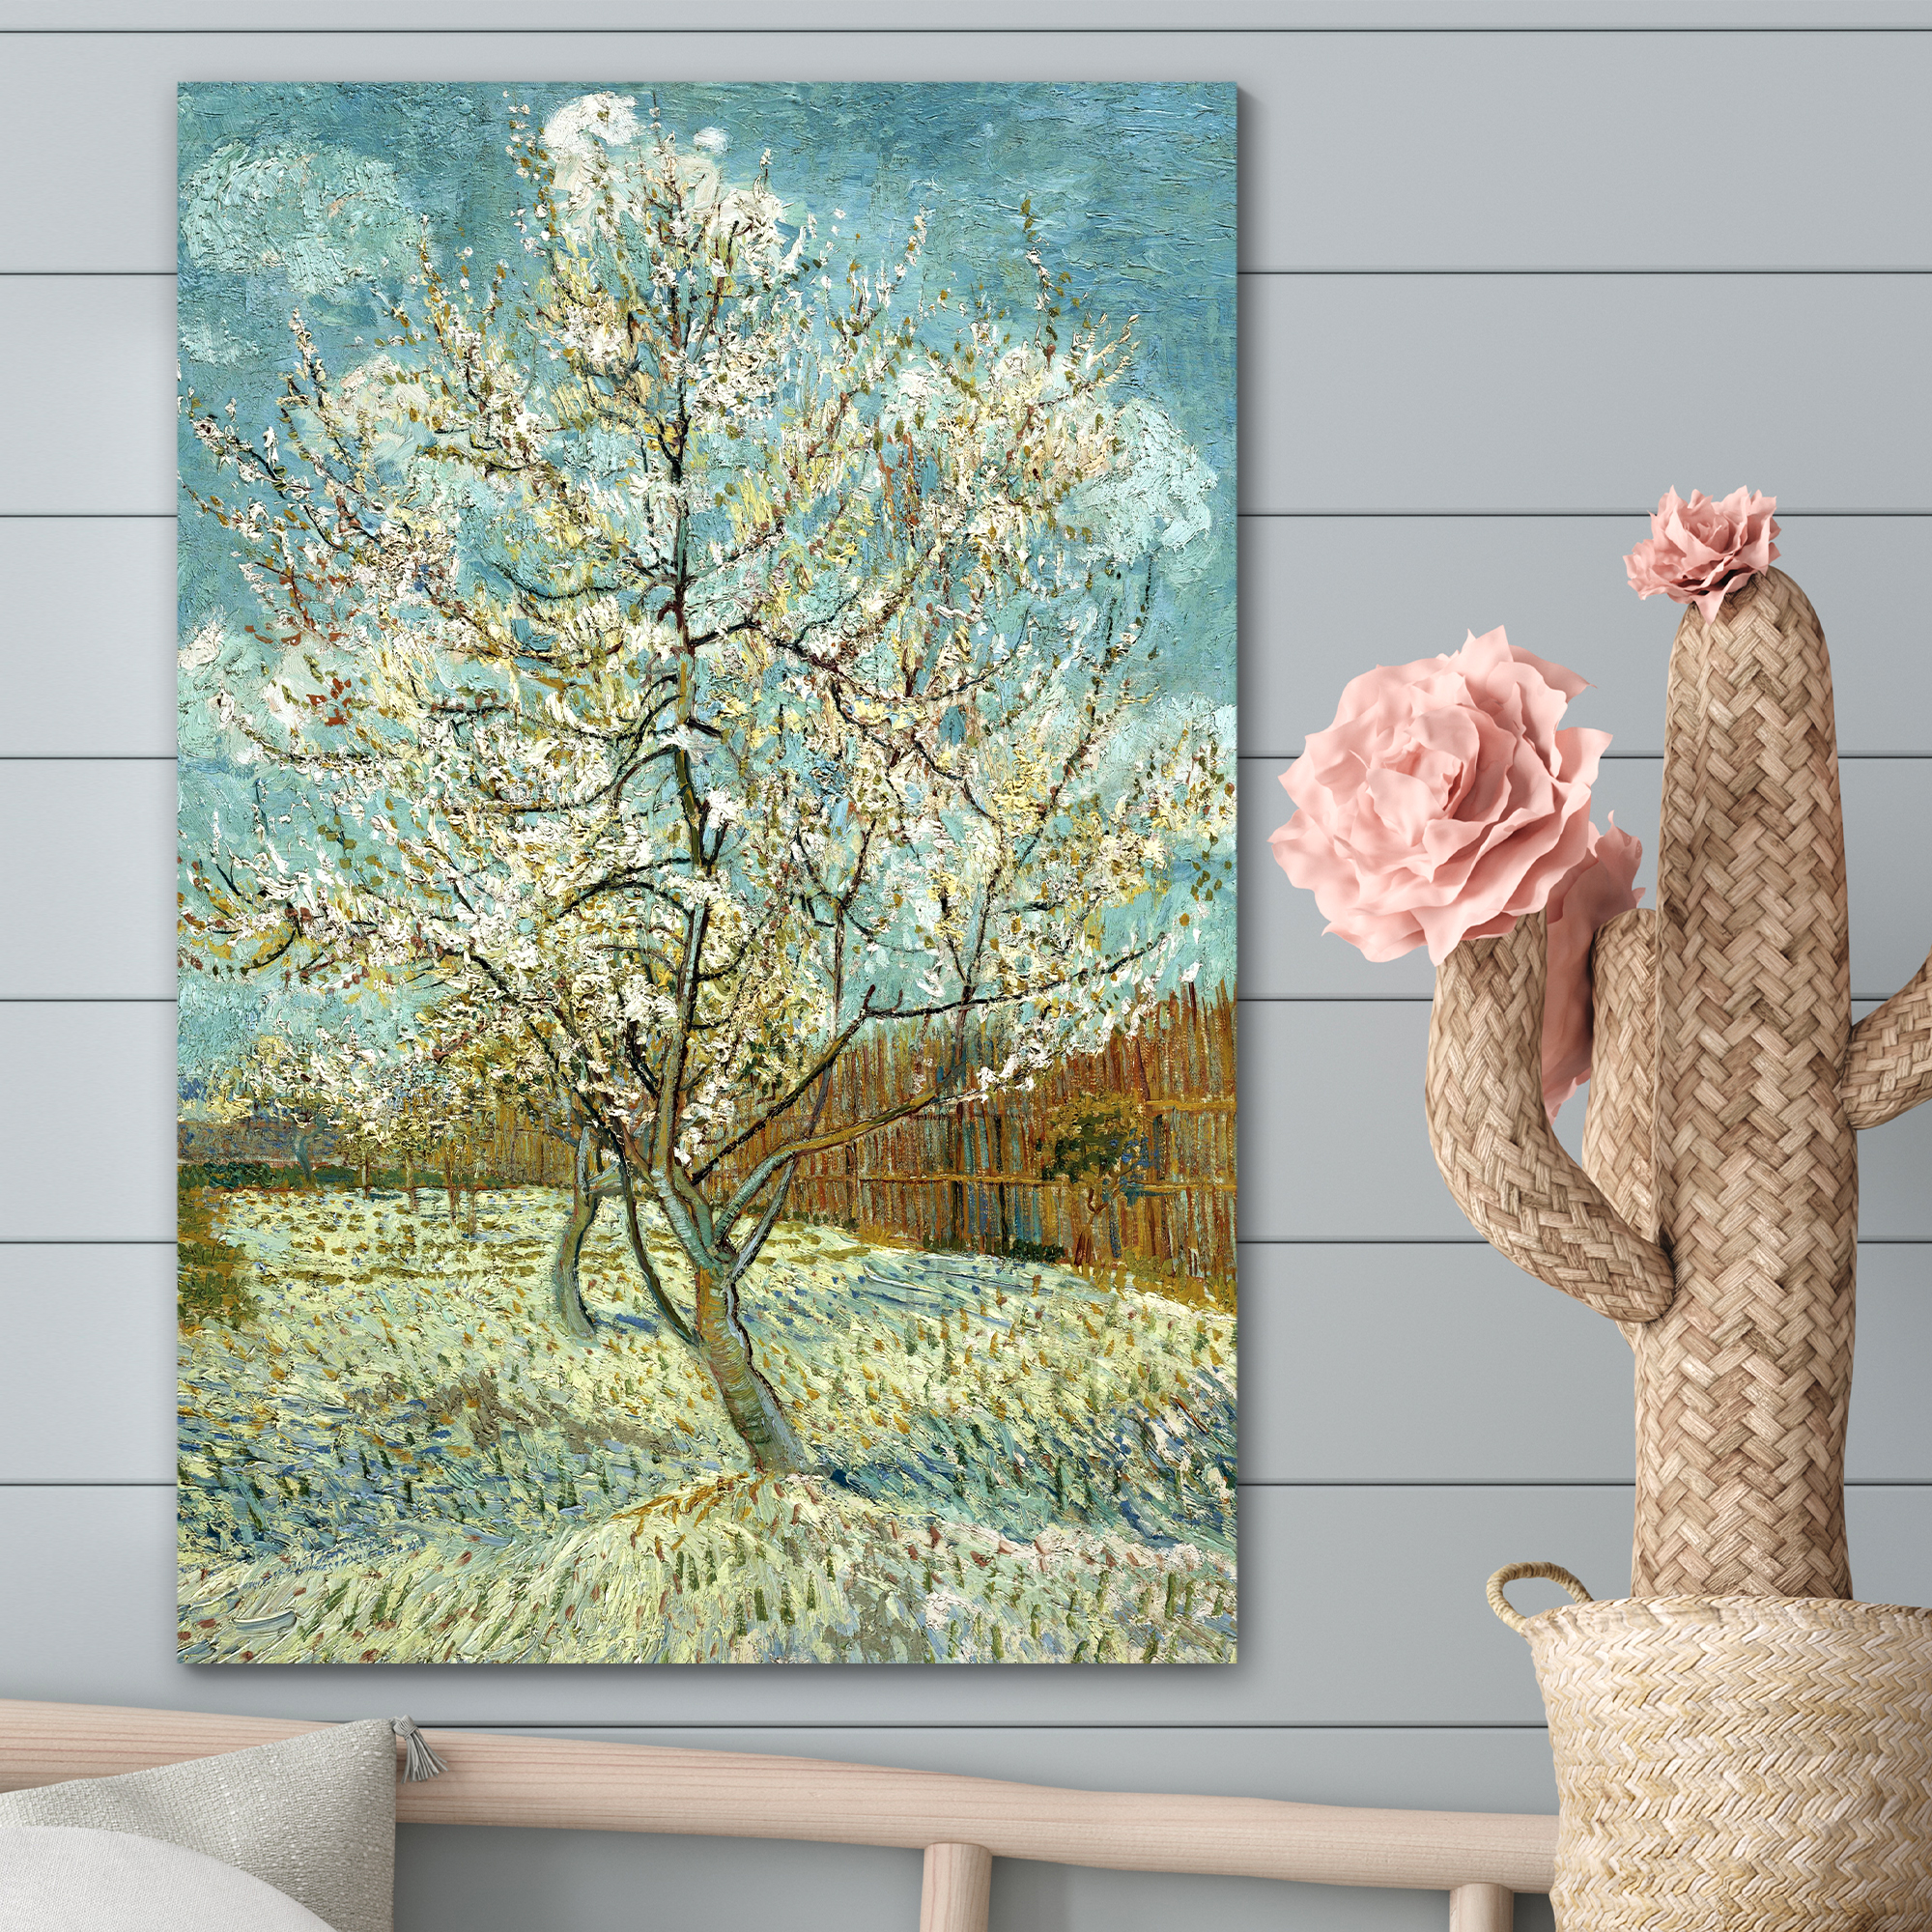 The Pink Peach Tree by Vincent Van Gogh - Canvas Print Wall Art Famous Oil Painting Reproduction - 32